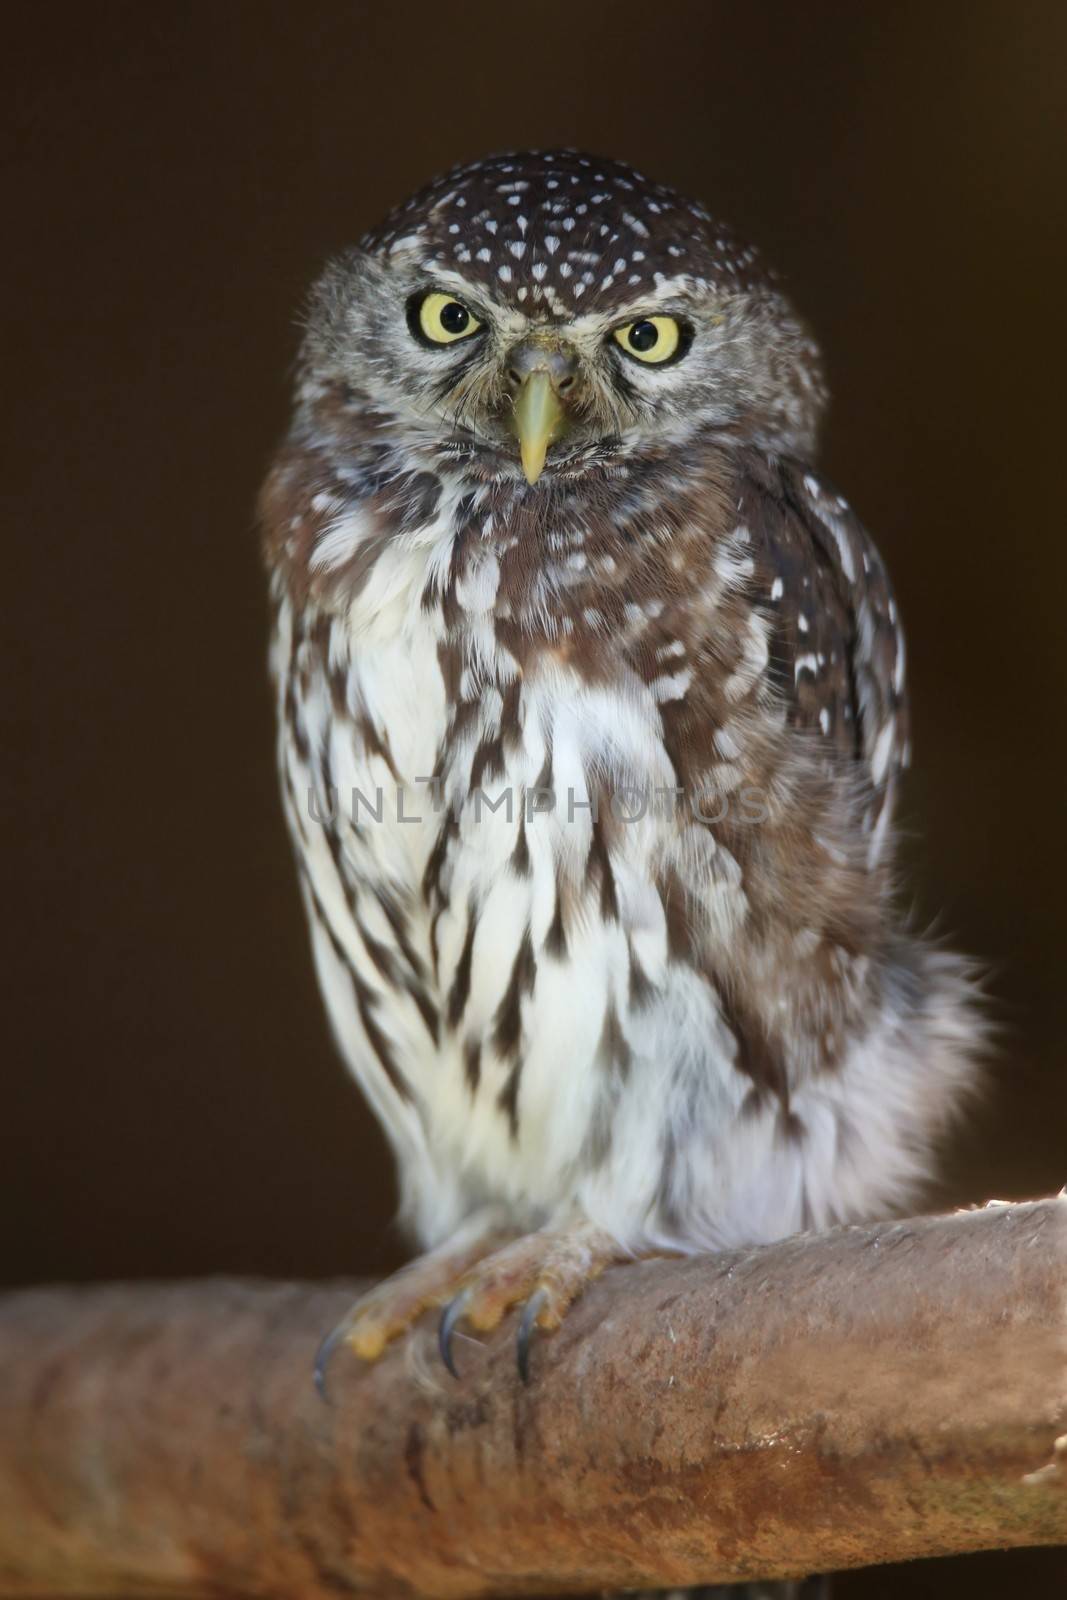 Portrait of a pearl-spotted owl with intent yellow eyes perched in a tree